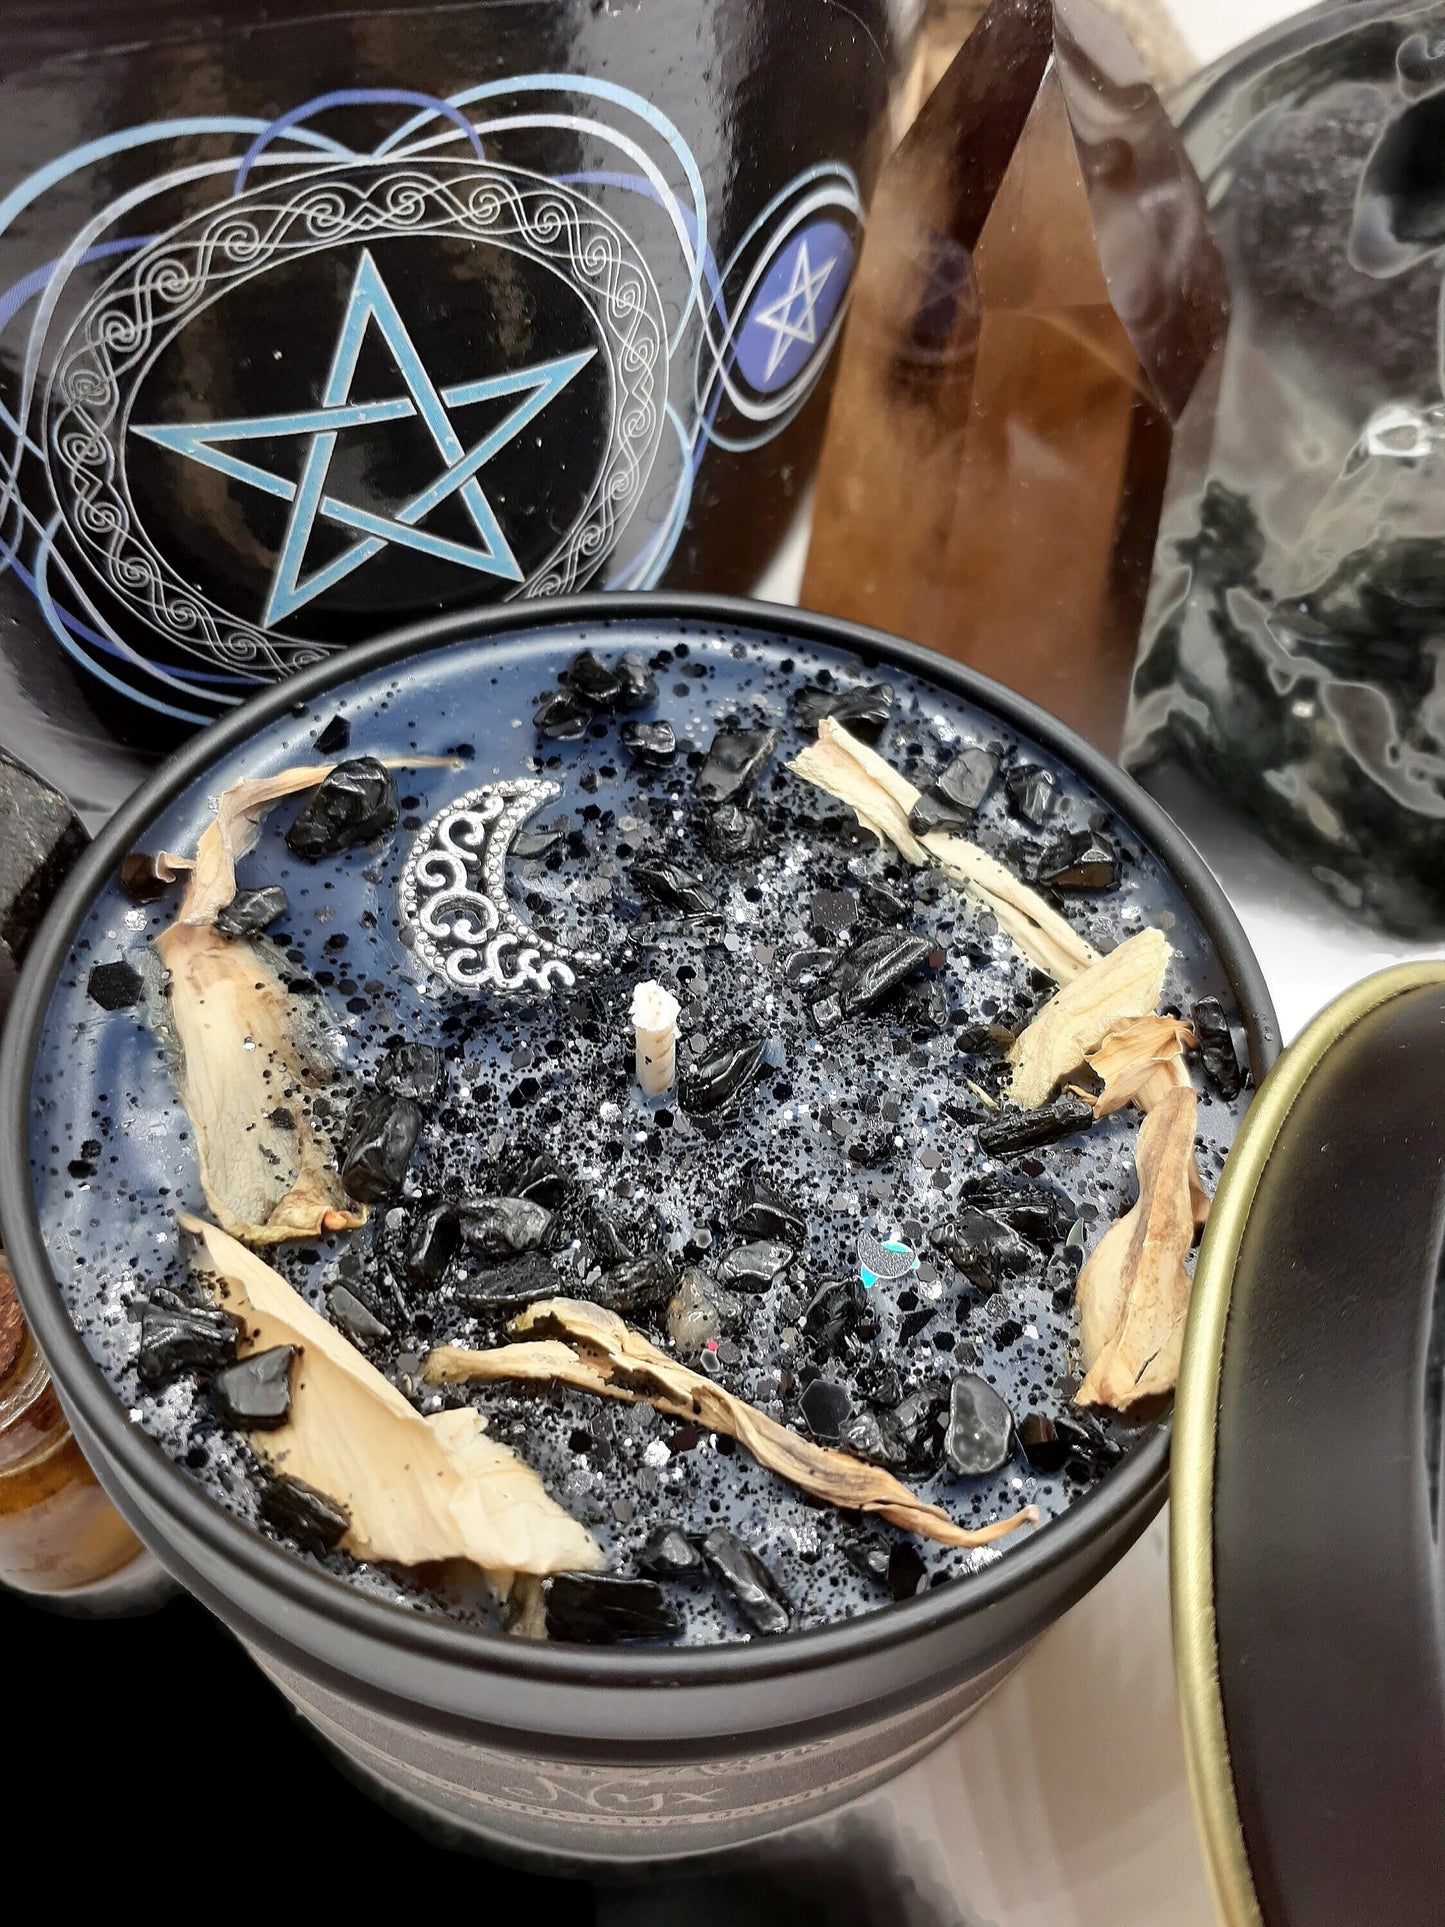 NYX Primordial Goddess of the Night Offering Wax Melts or Candles - Moonflowers and Black Tourmaline - Pagan Wiccan Witch Ritual Candle